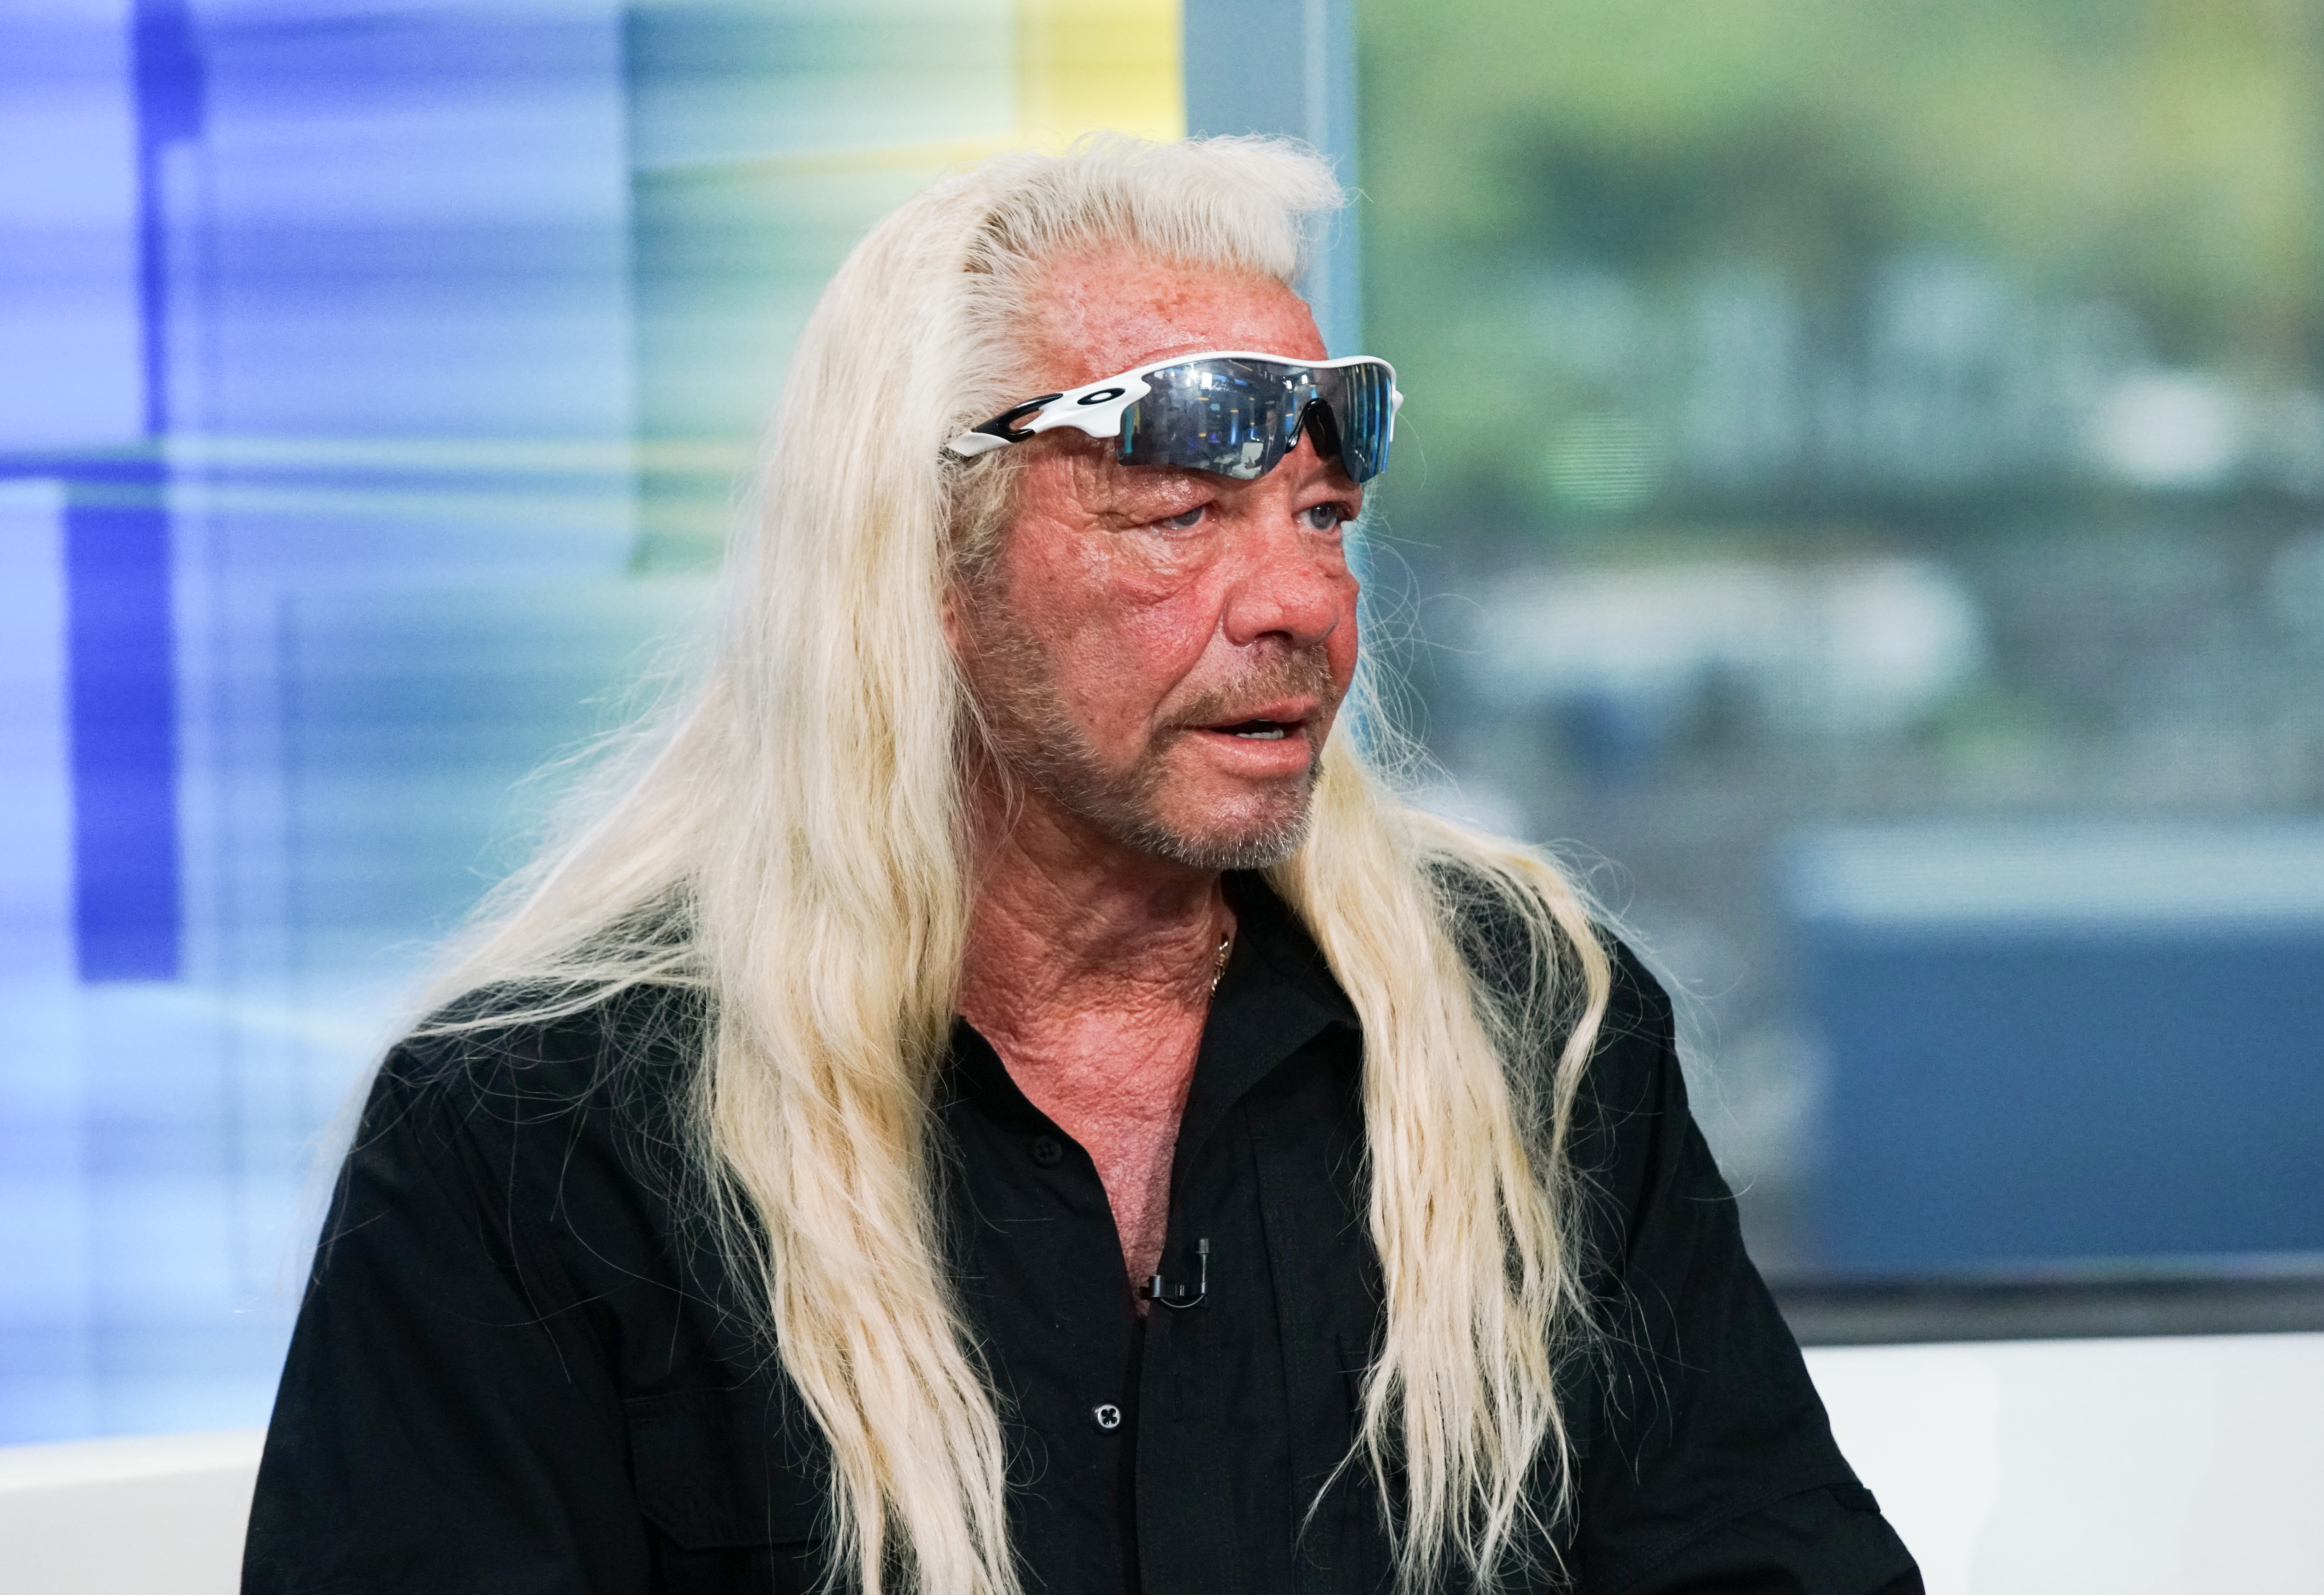 Duane Chapman visits "FOX & Friends" at FOX Studios on August 28, 2019 in New York City. | Source: Getty Images